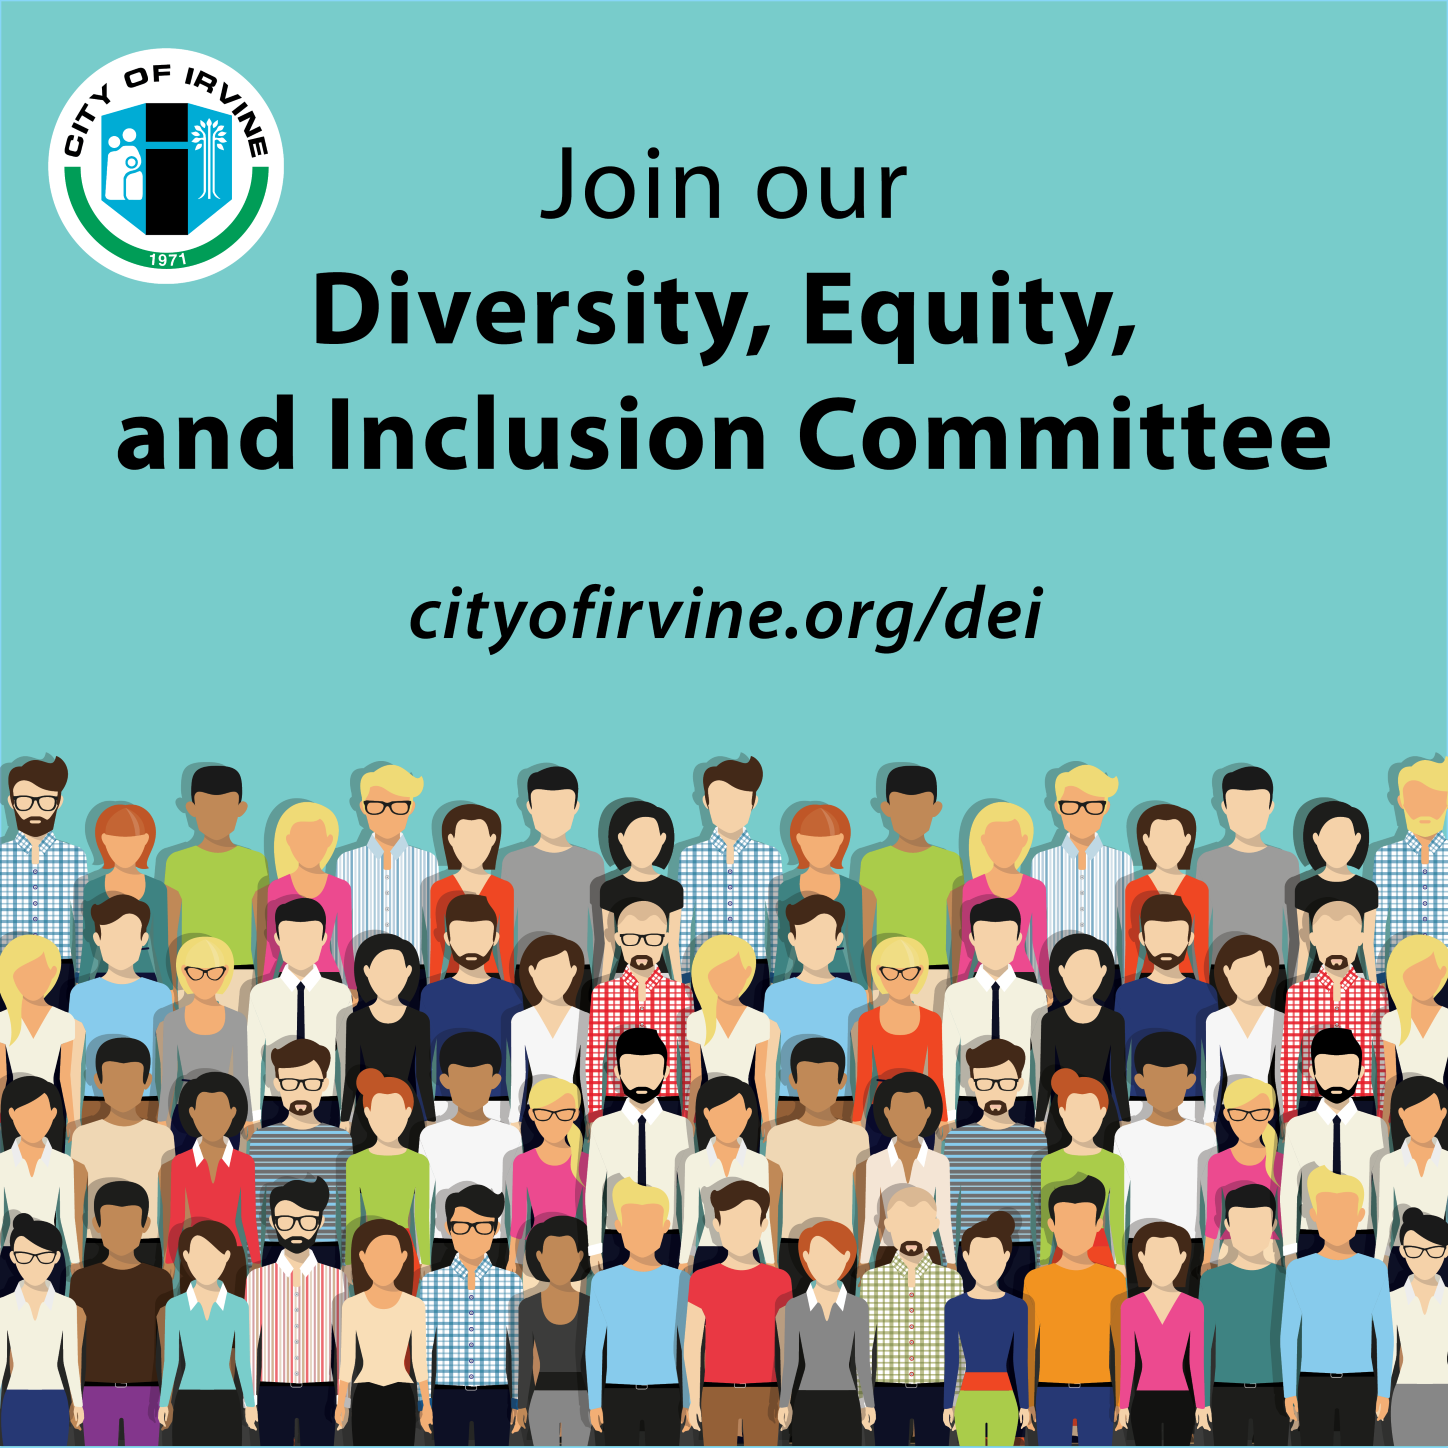 Diversity, Equity, and Inclusion Committee